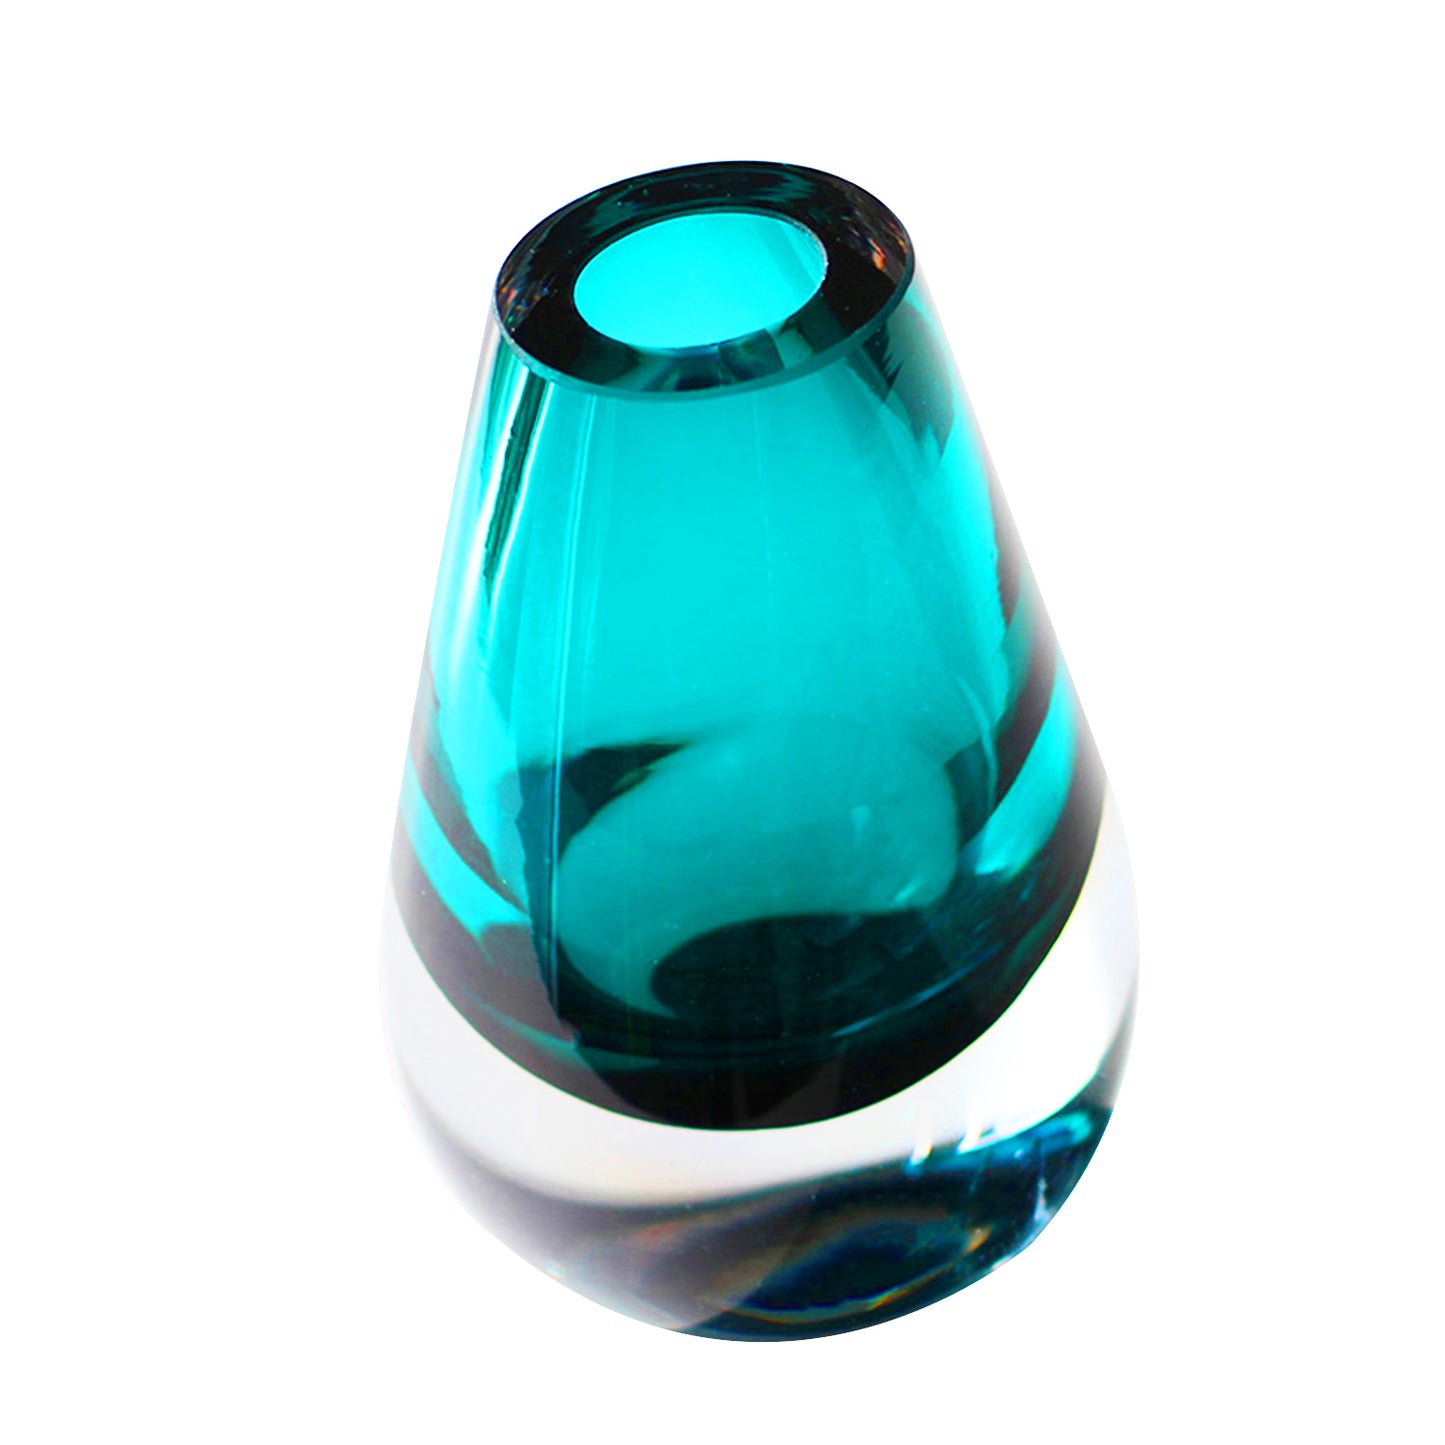 Drop Turquoise Vase - 15 x 10.9 x 8 cm - Mouth-Blown Thick Glass - Eco-Chic Decor